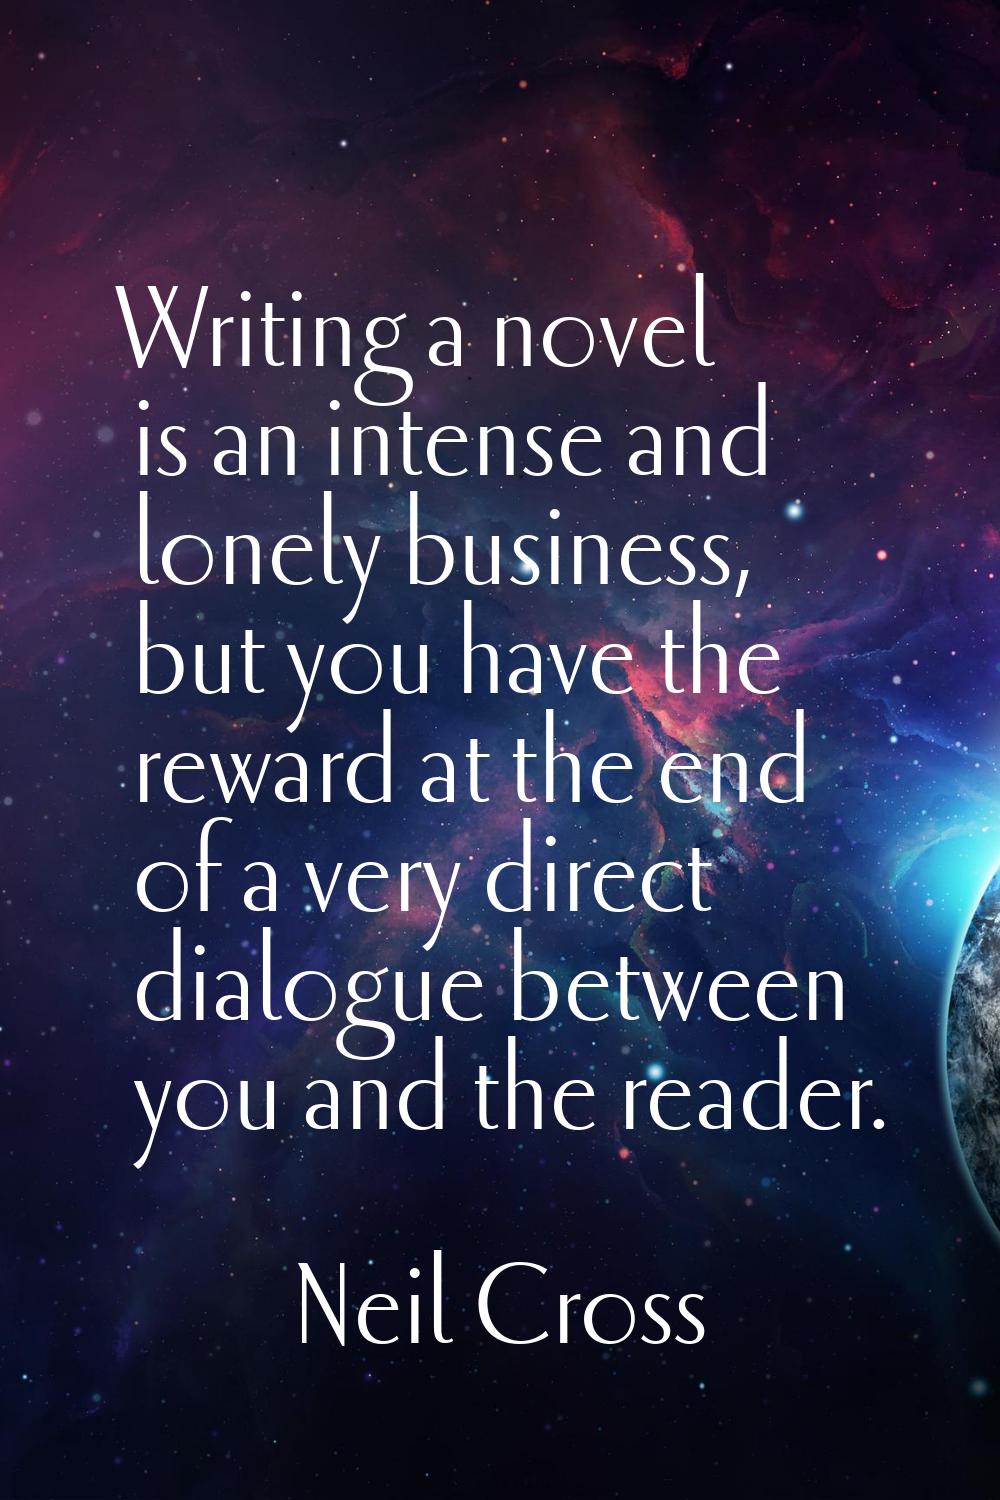 Writing a novel is an intense and lonely business, but you have the reward at the end of a very dir